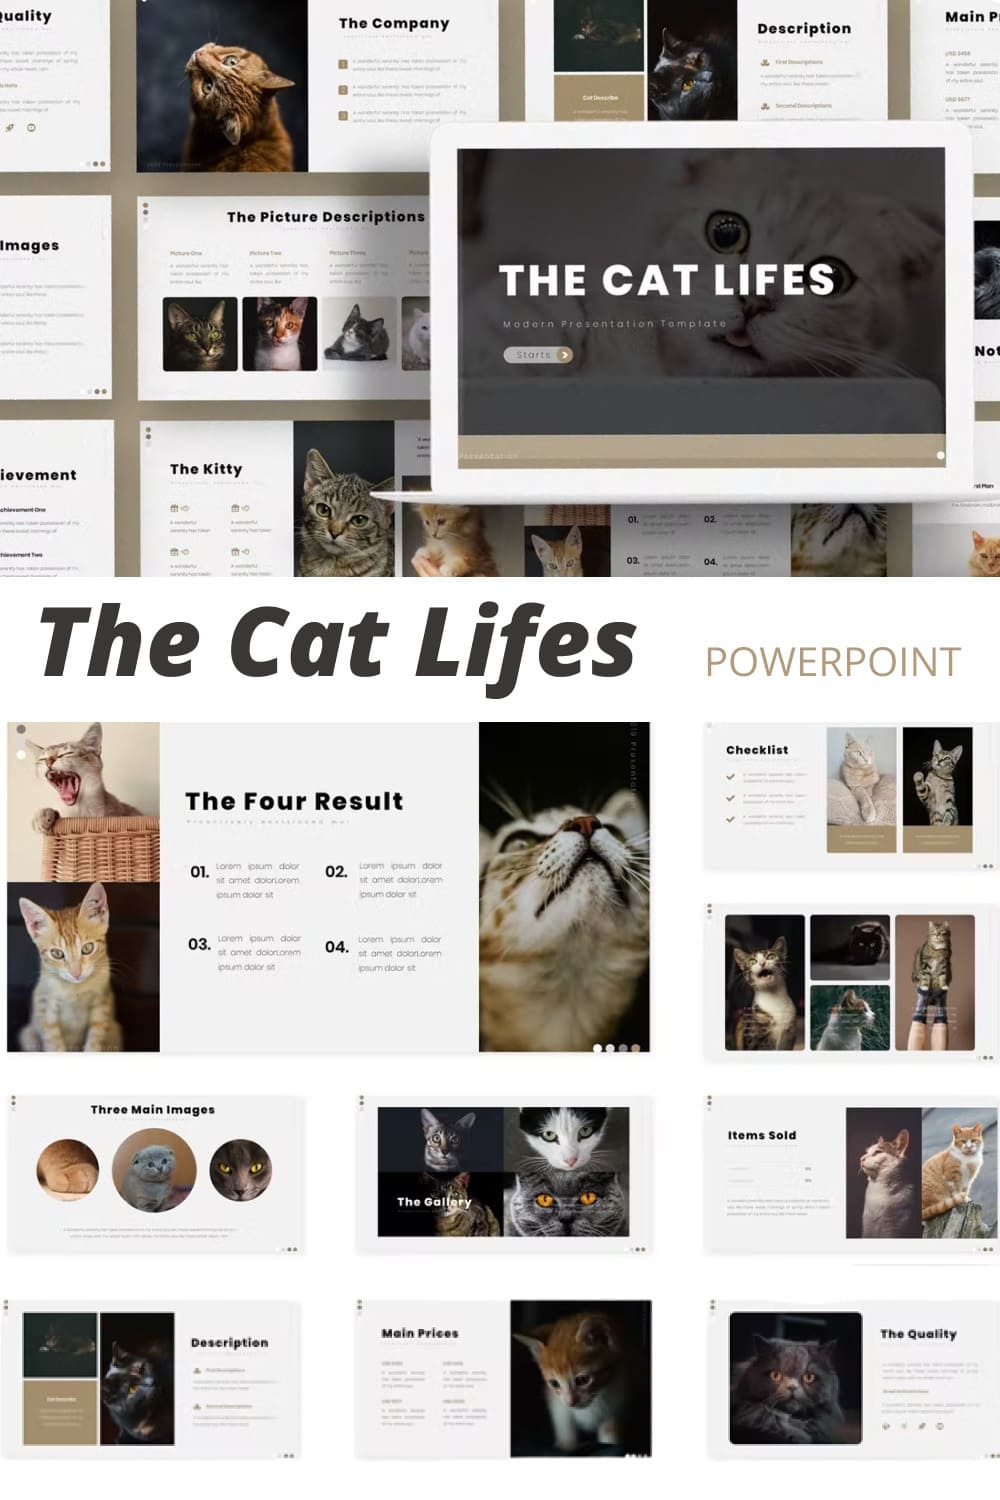 The cat lifes powerpoint template - pinterest image preview.